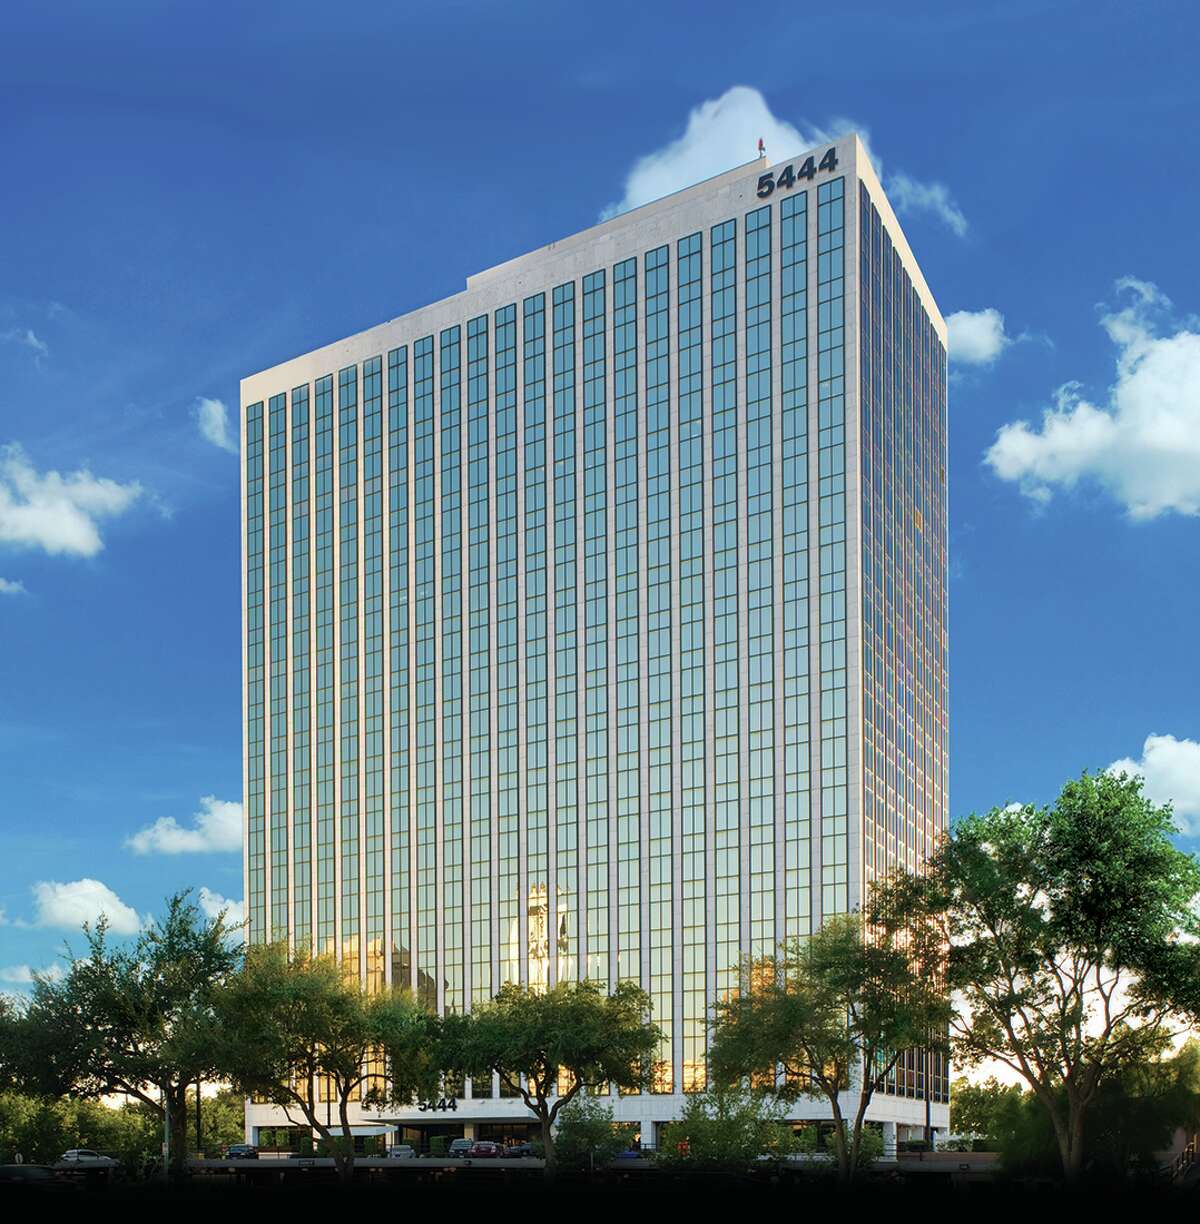 5444 Westheimer, a 20-story office building in Houston s Galleria area, is managed by Tanglewood Property Group on behalf of long-time property owner, Franklin Post Oak. CBRE handles leasing.